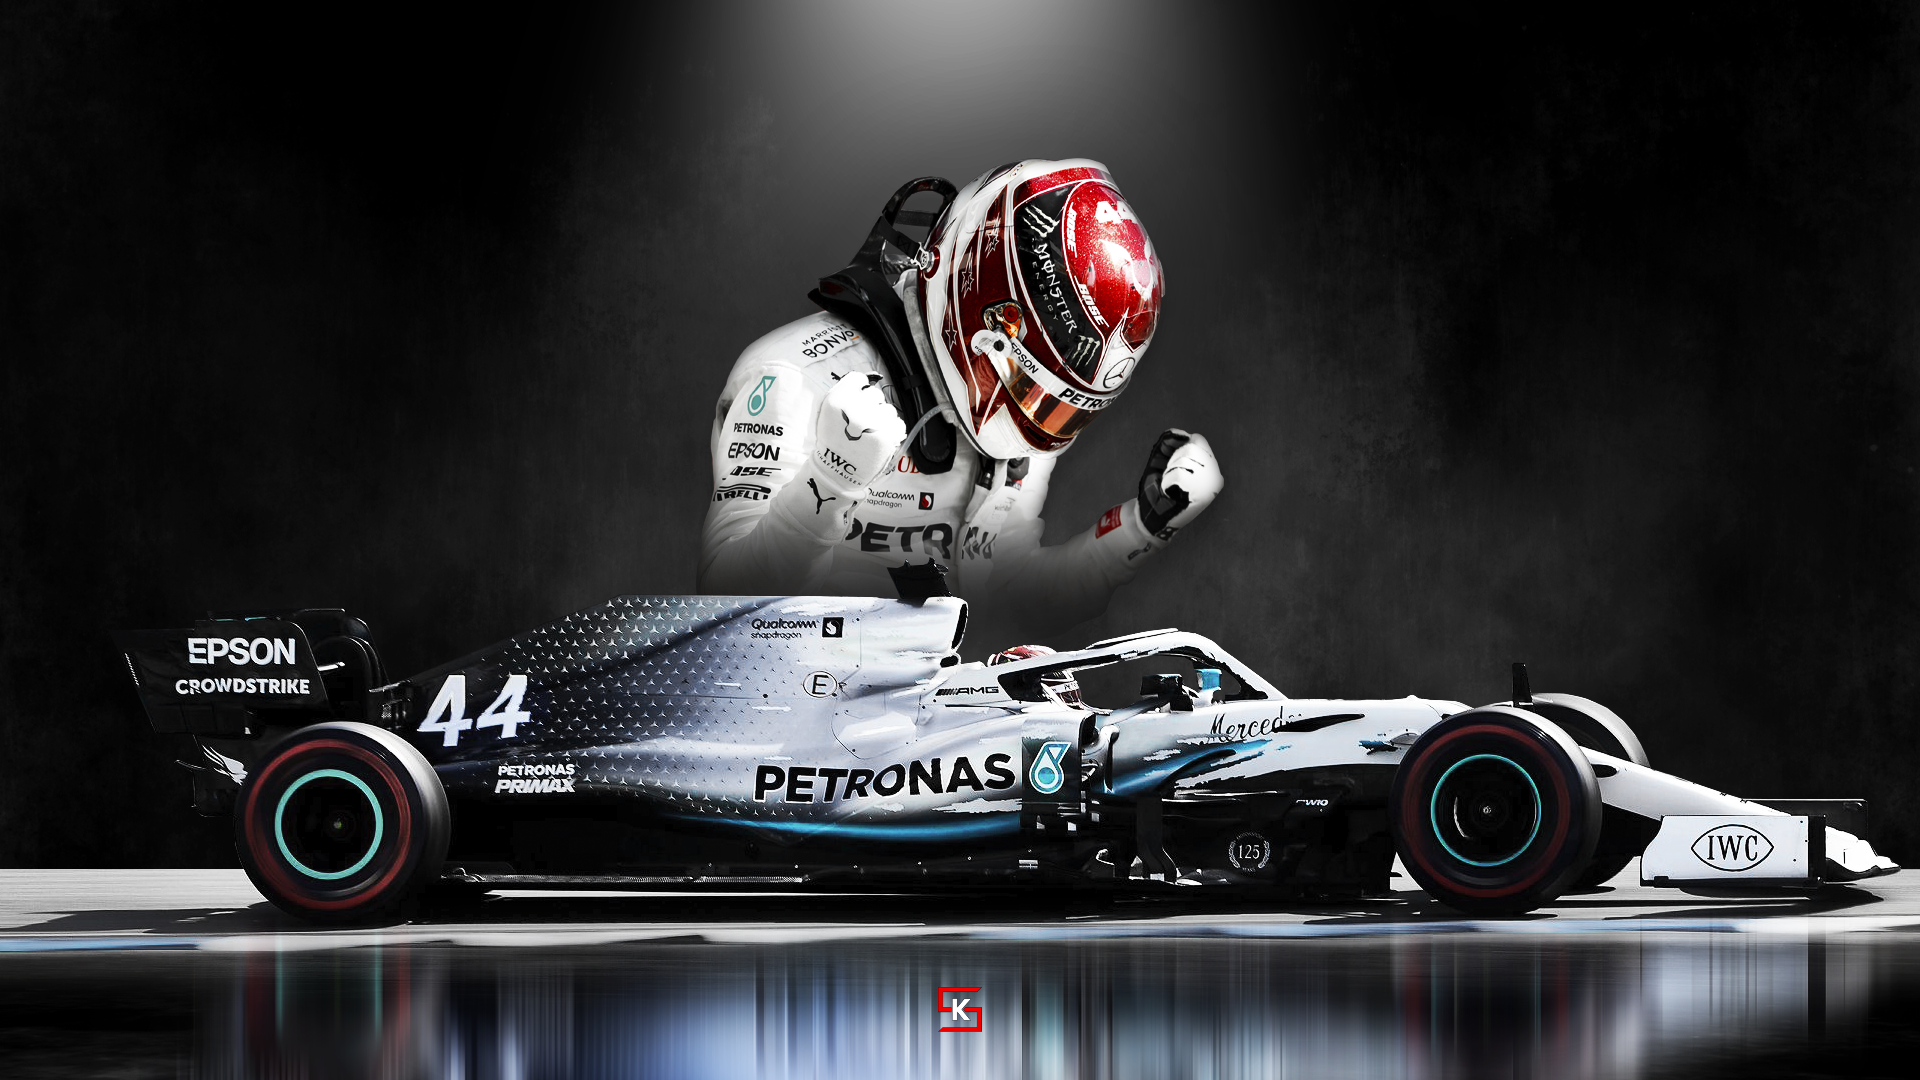 Download Champion F1 driver Lewis Hamilton stepping out of his race car  Wallpaper | Wallpapers.com